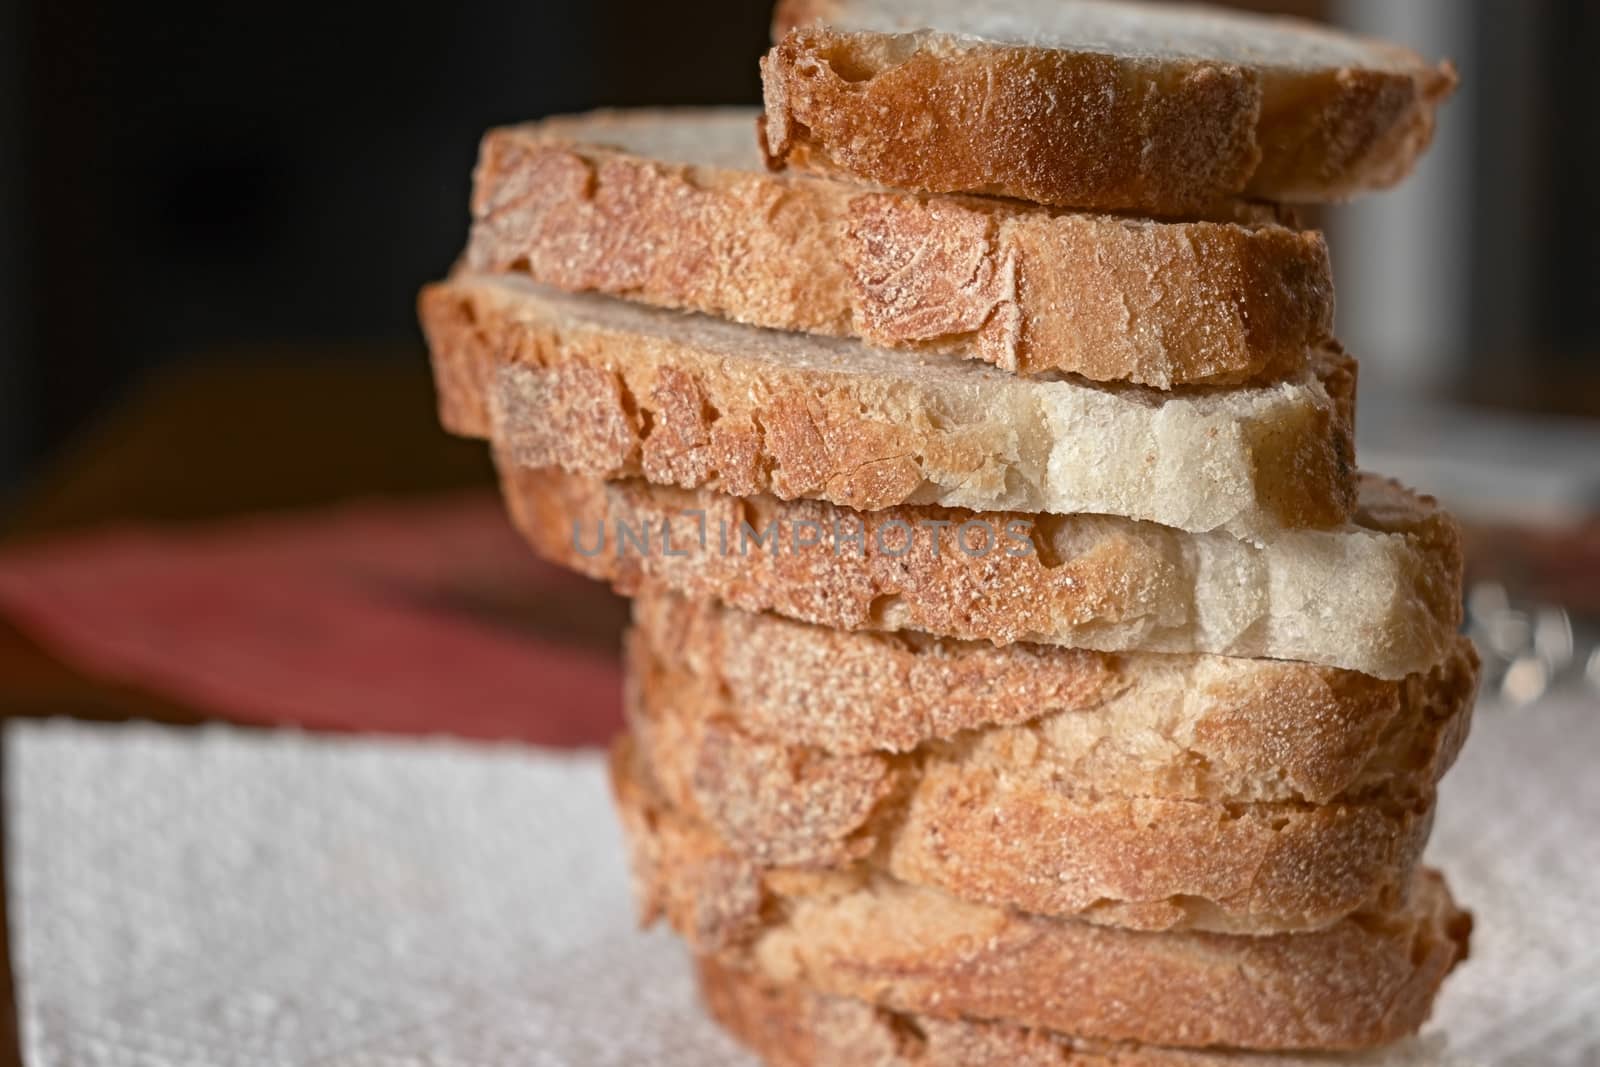 Slices of bread stacked by EnzoArt